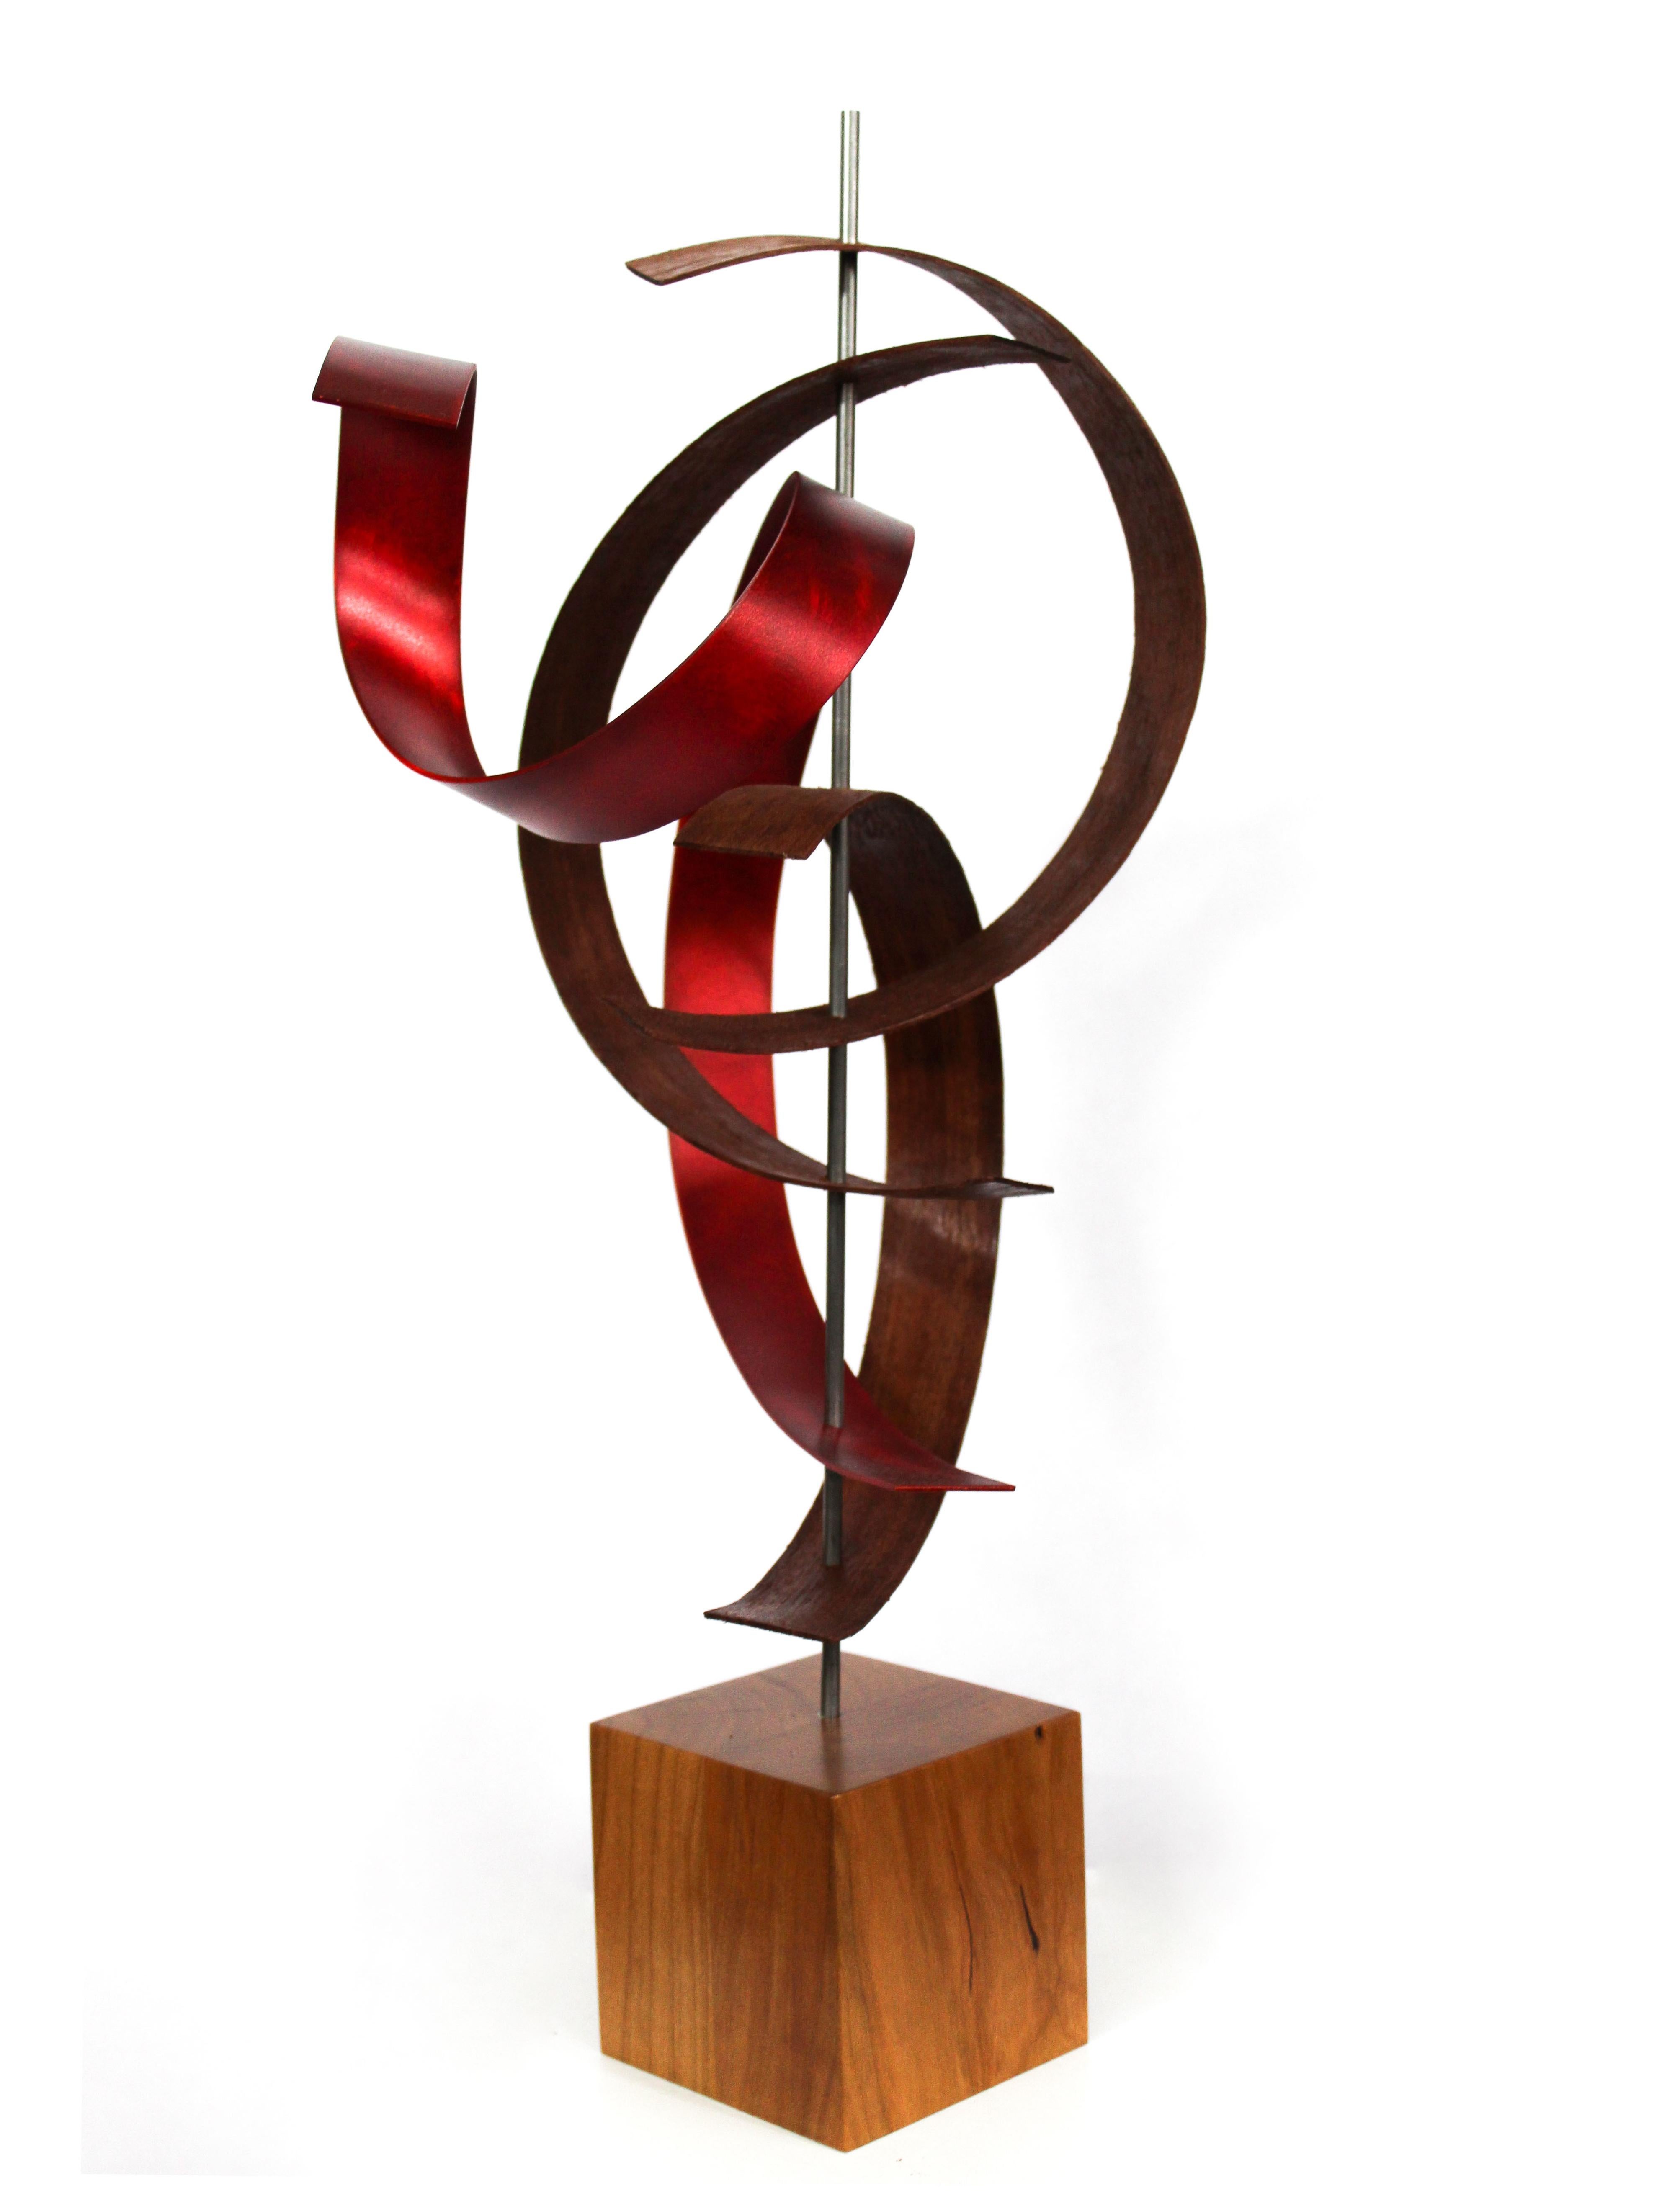 Description:  This sculpture consists of pre-formed black walnut, mahogany with tinted aluminum and grind pattern. Solid cherry base. This sculpture is an open-edition multiple original; hand-made by the artist.
Title: Wind

Artist Bio:
Jeff was